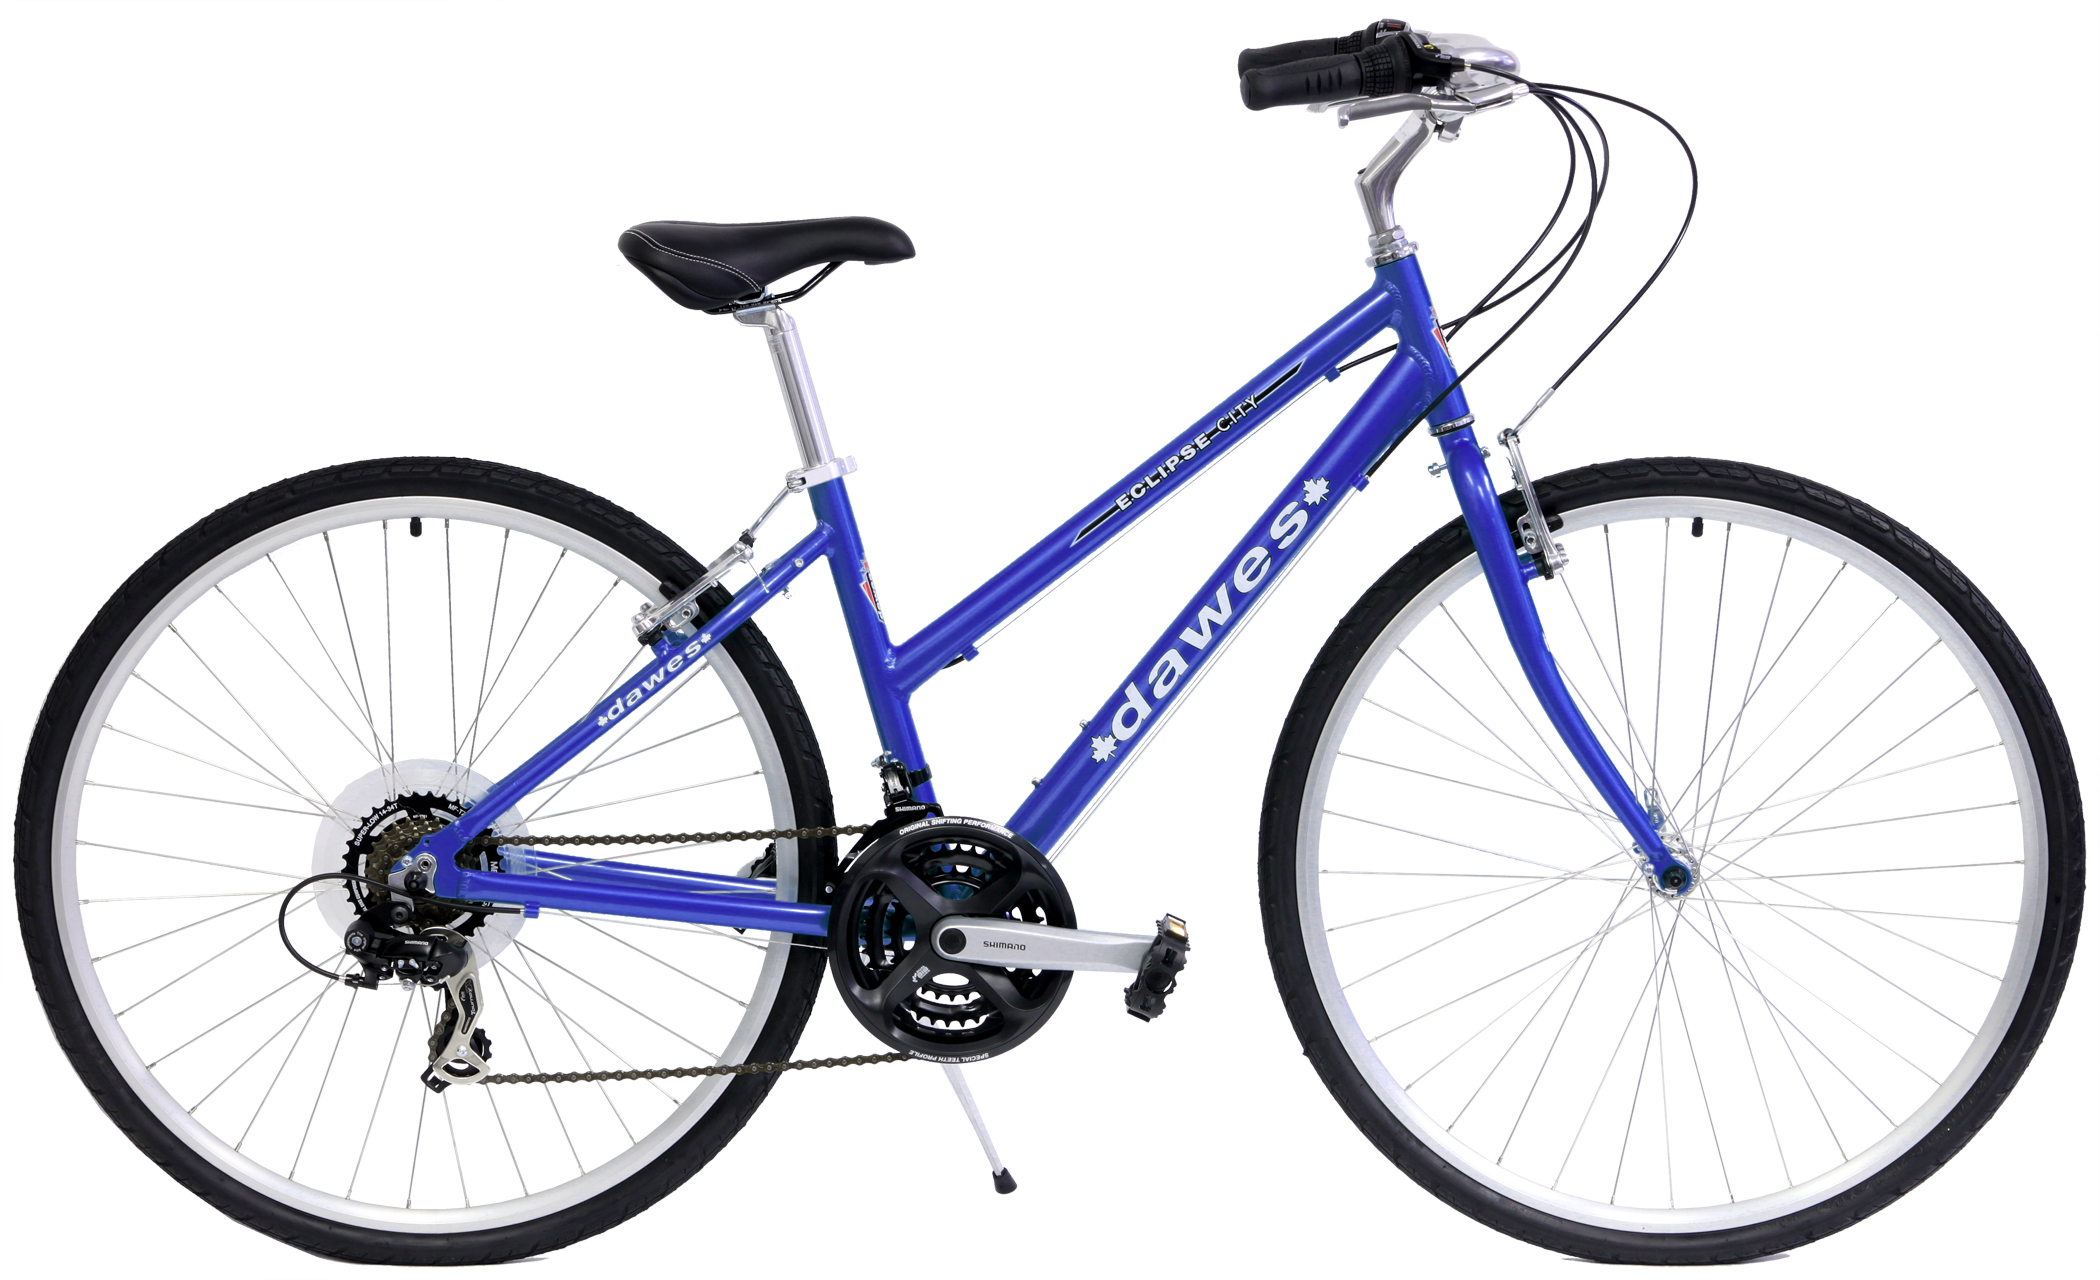 Save up to 60 off new Hybrid Flat Bar Road Bikes Dawes Eclipse City